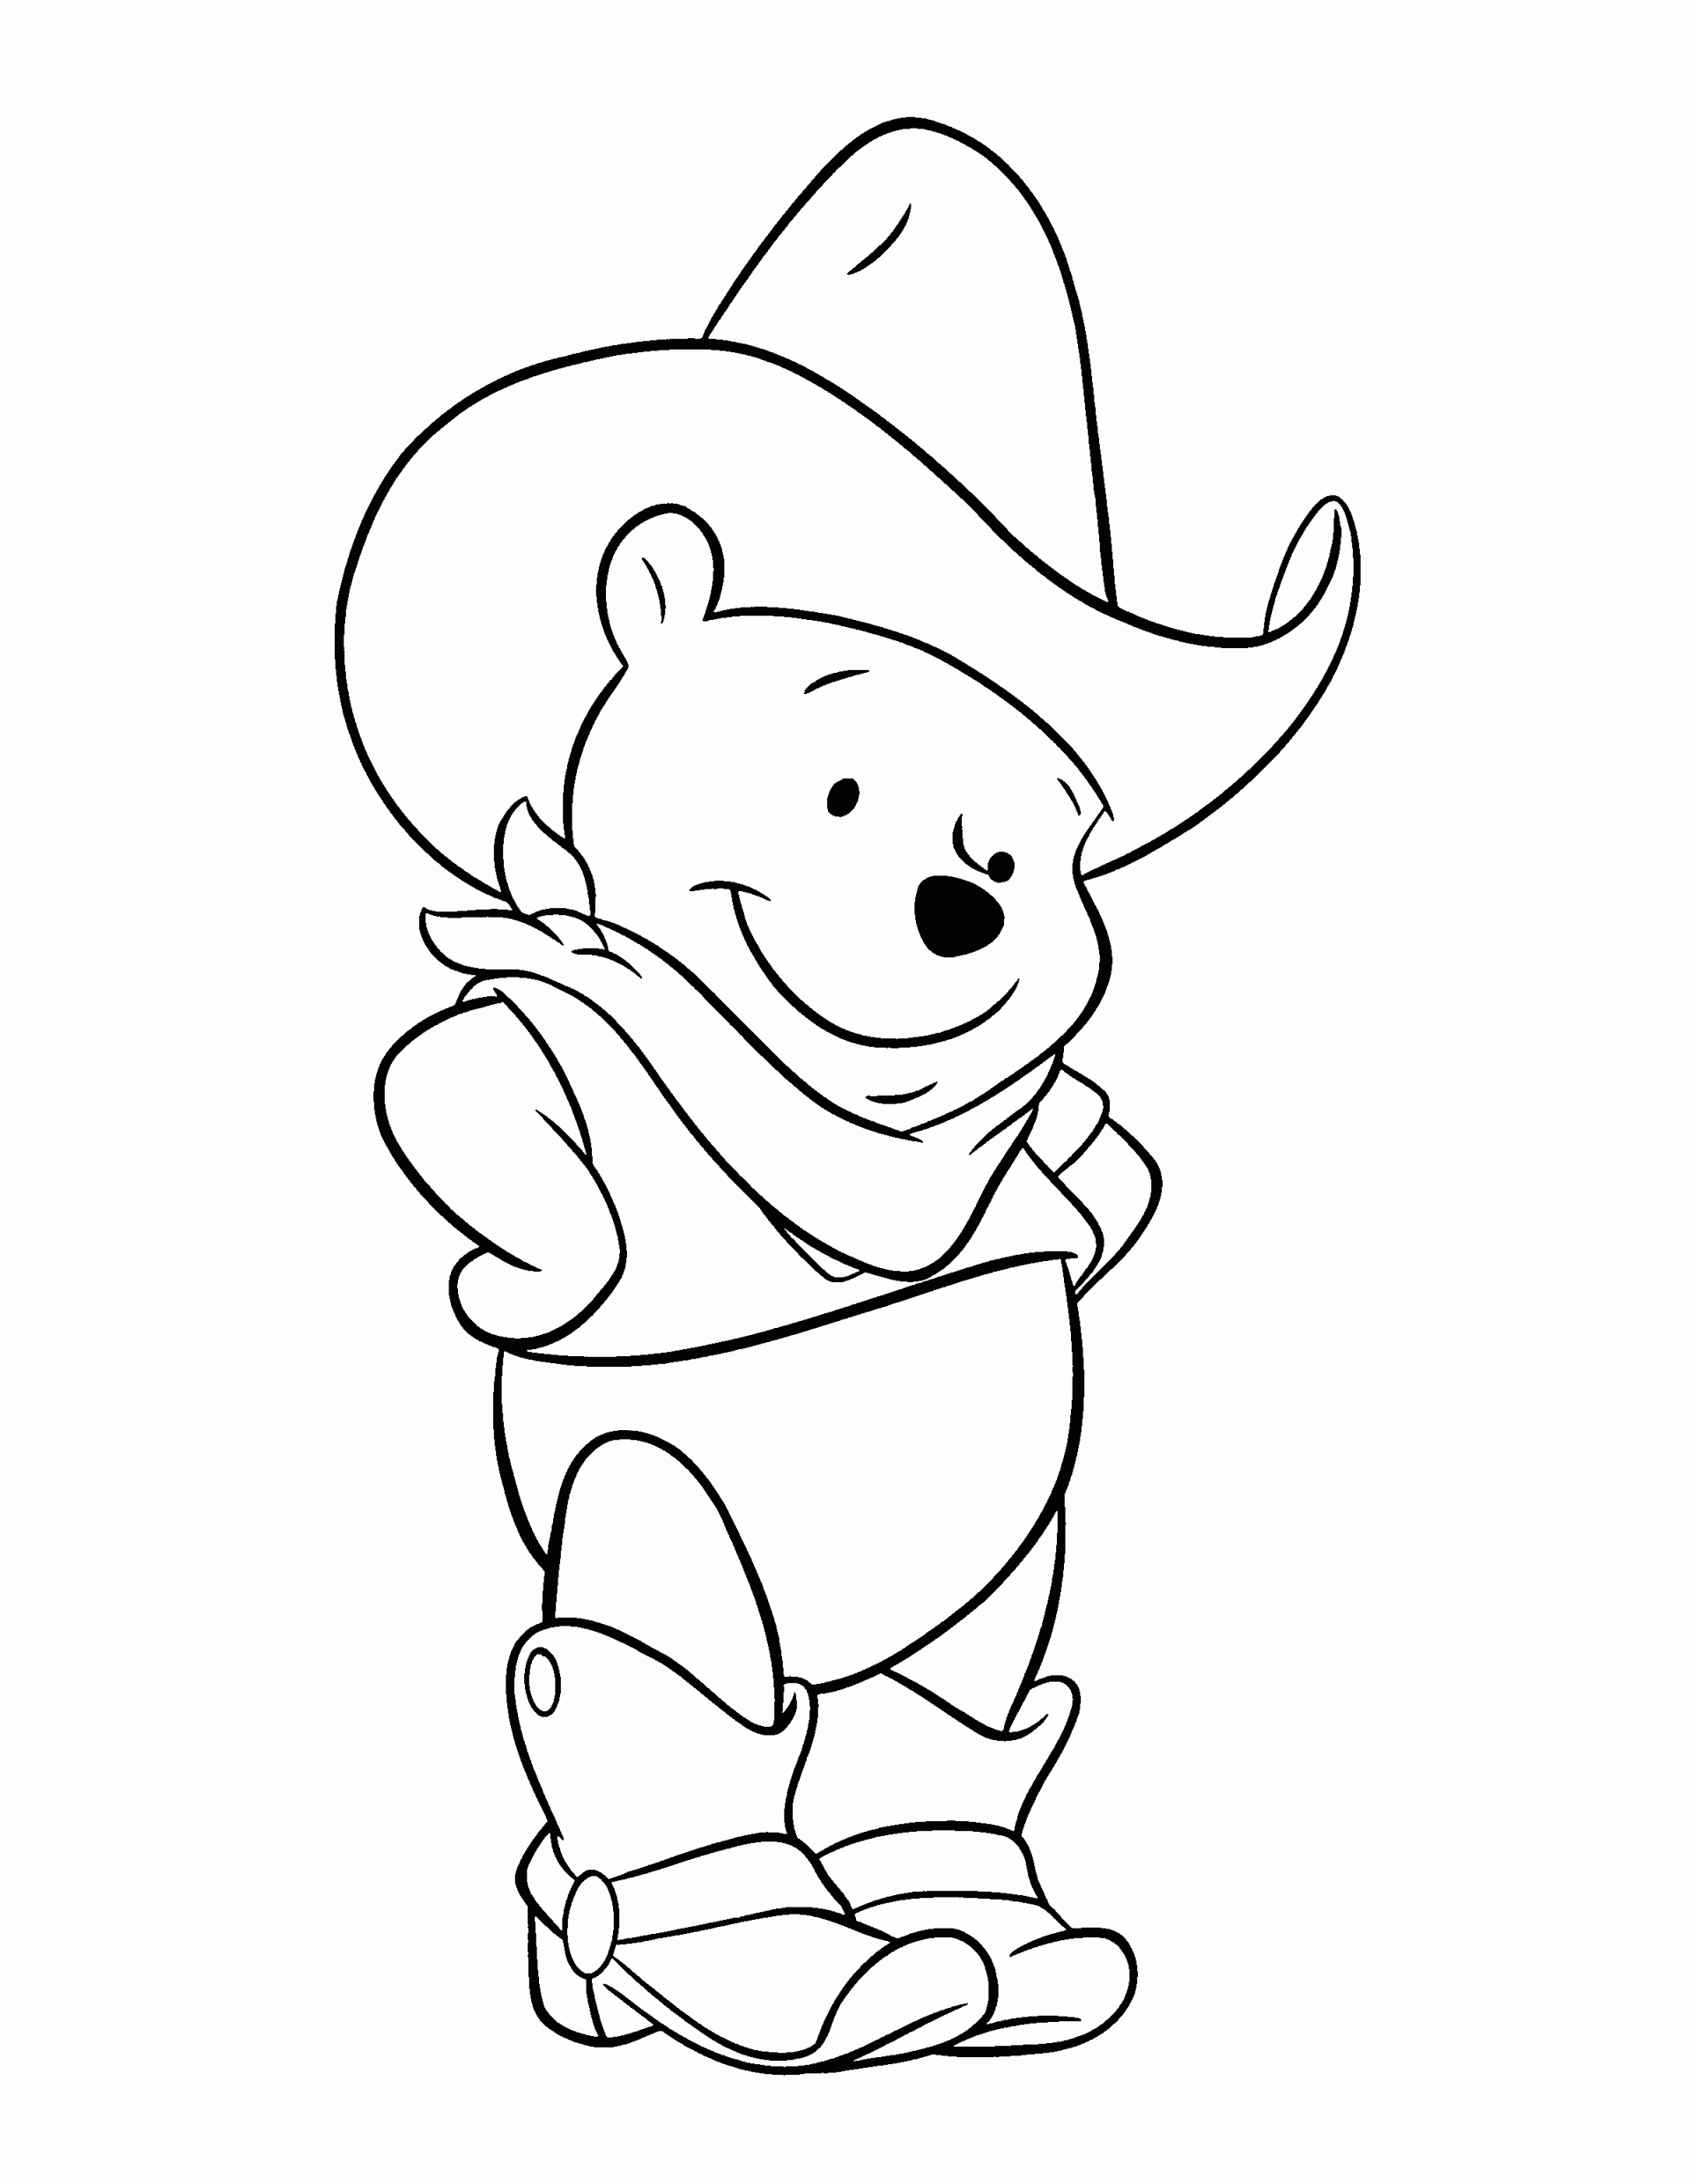 Cartoon Characters Coloring Pictures   Coloring Page Photos ...